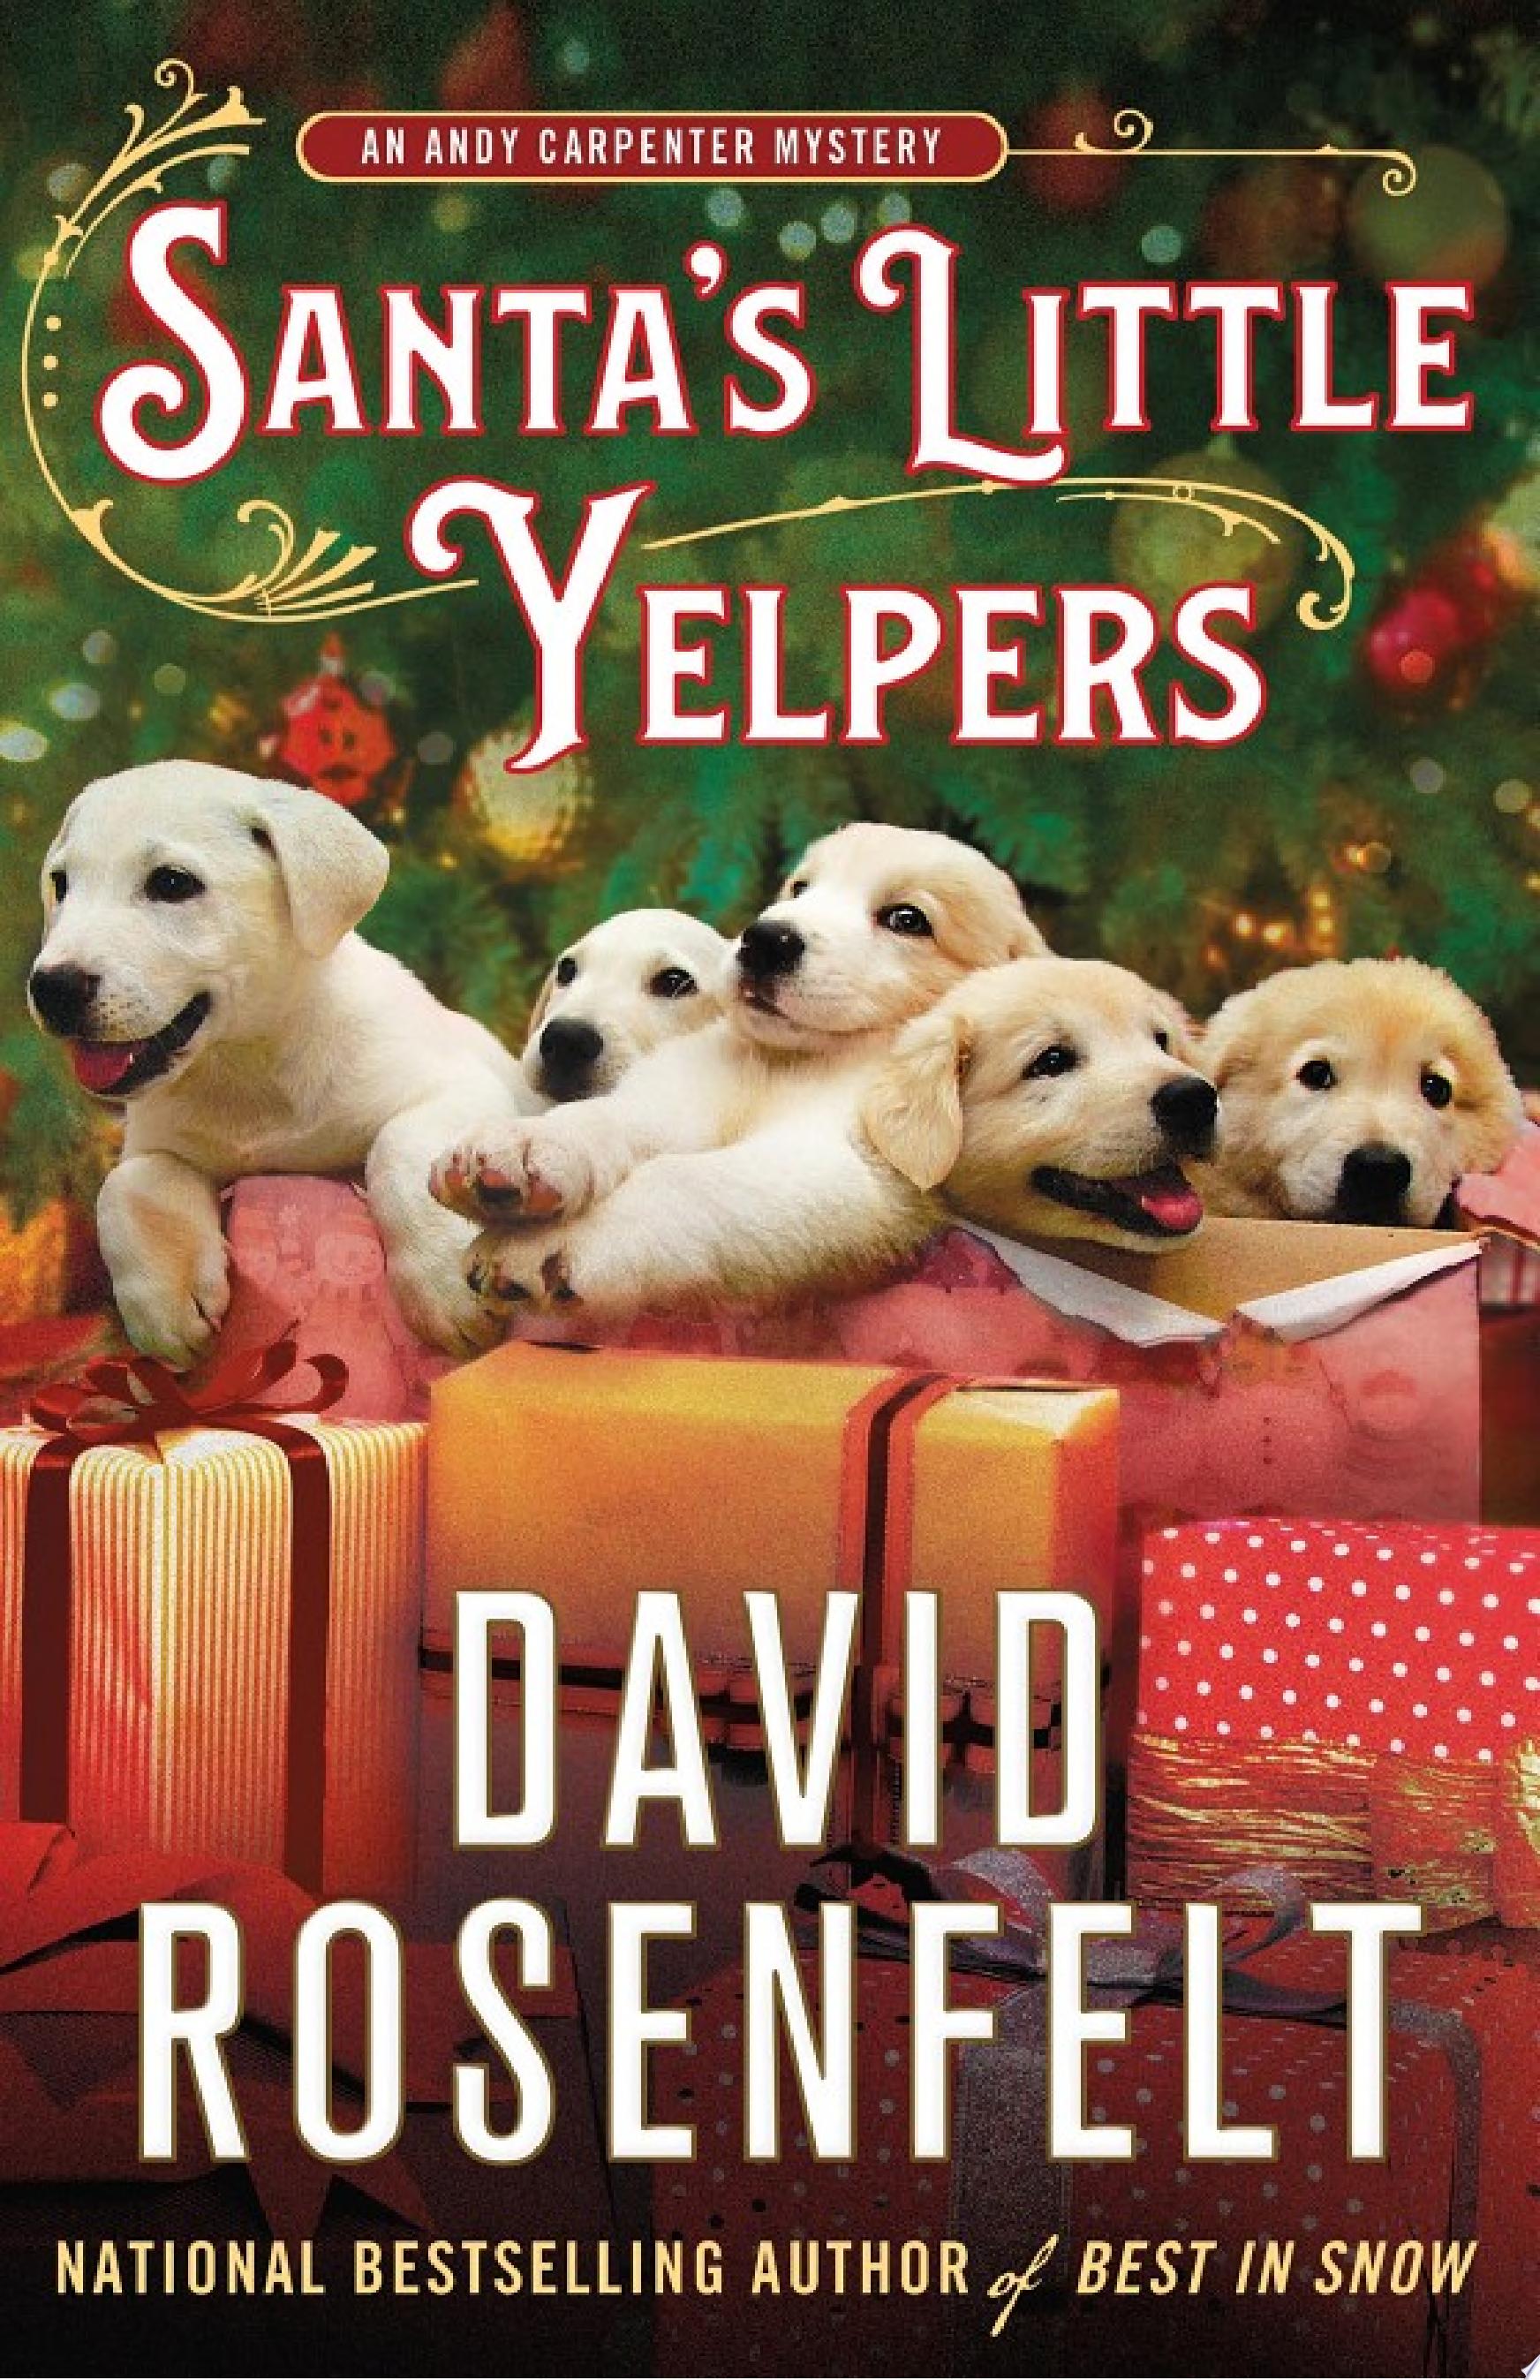 Image for "Santa's Little Yelpers"